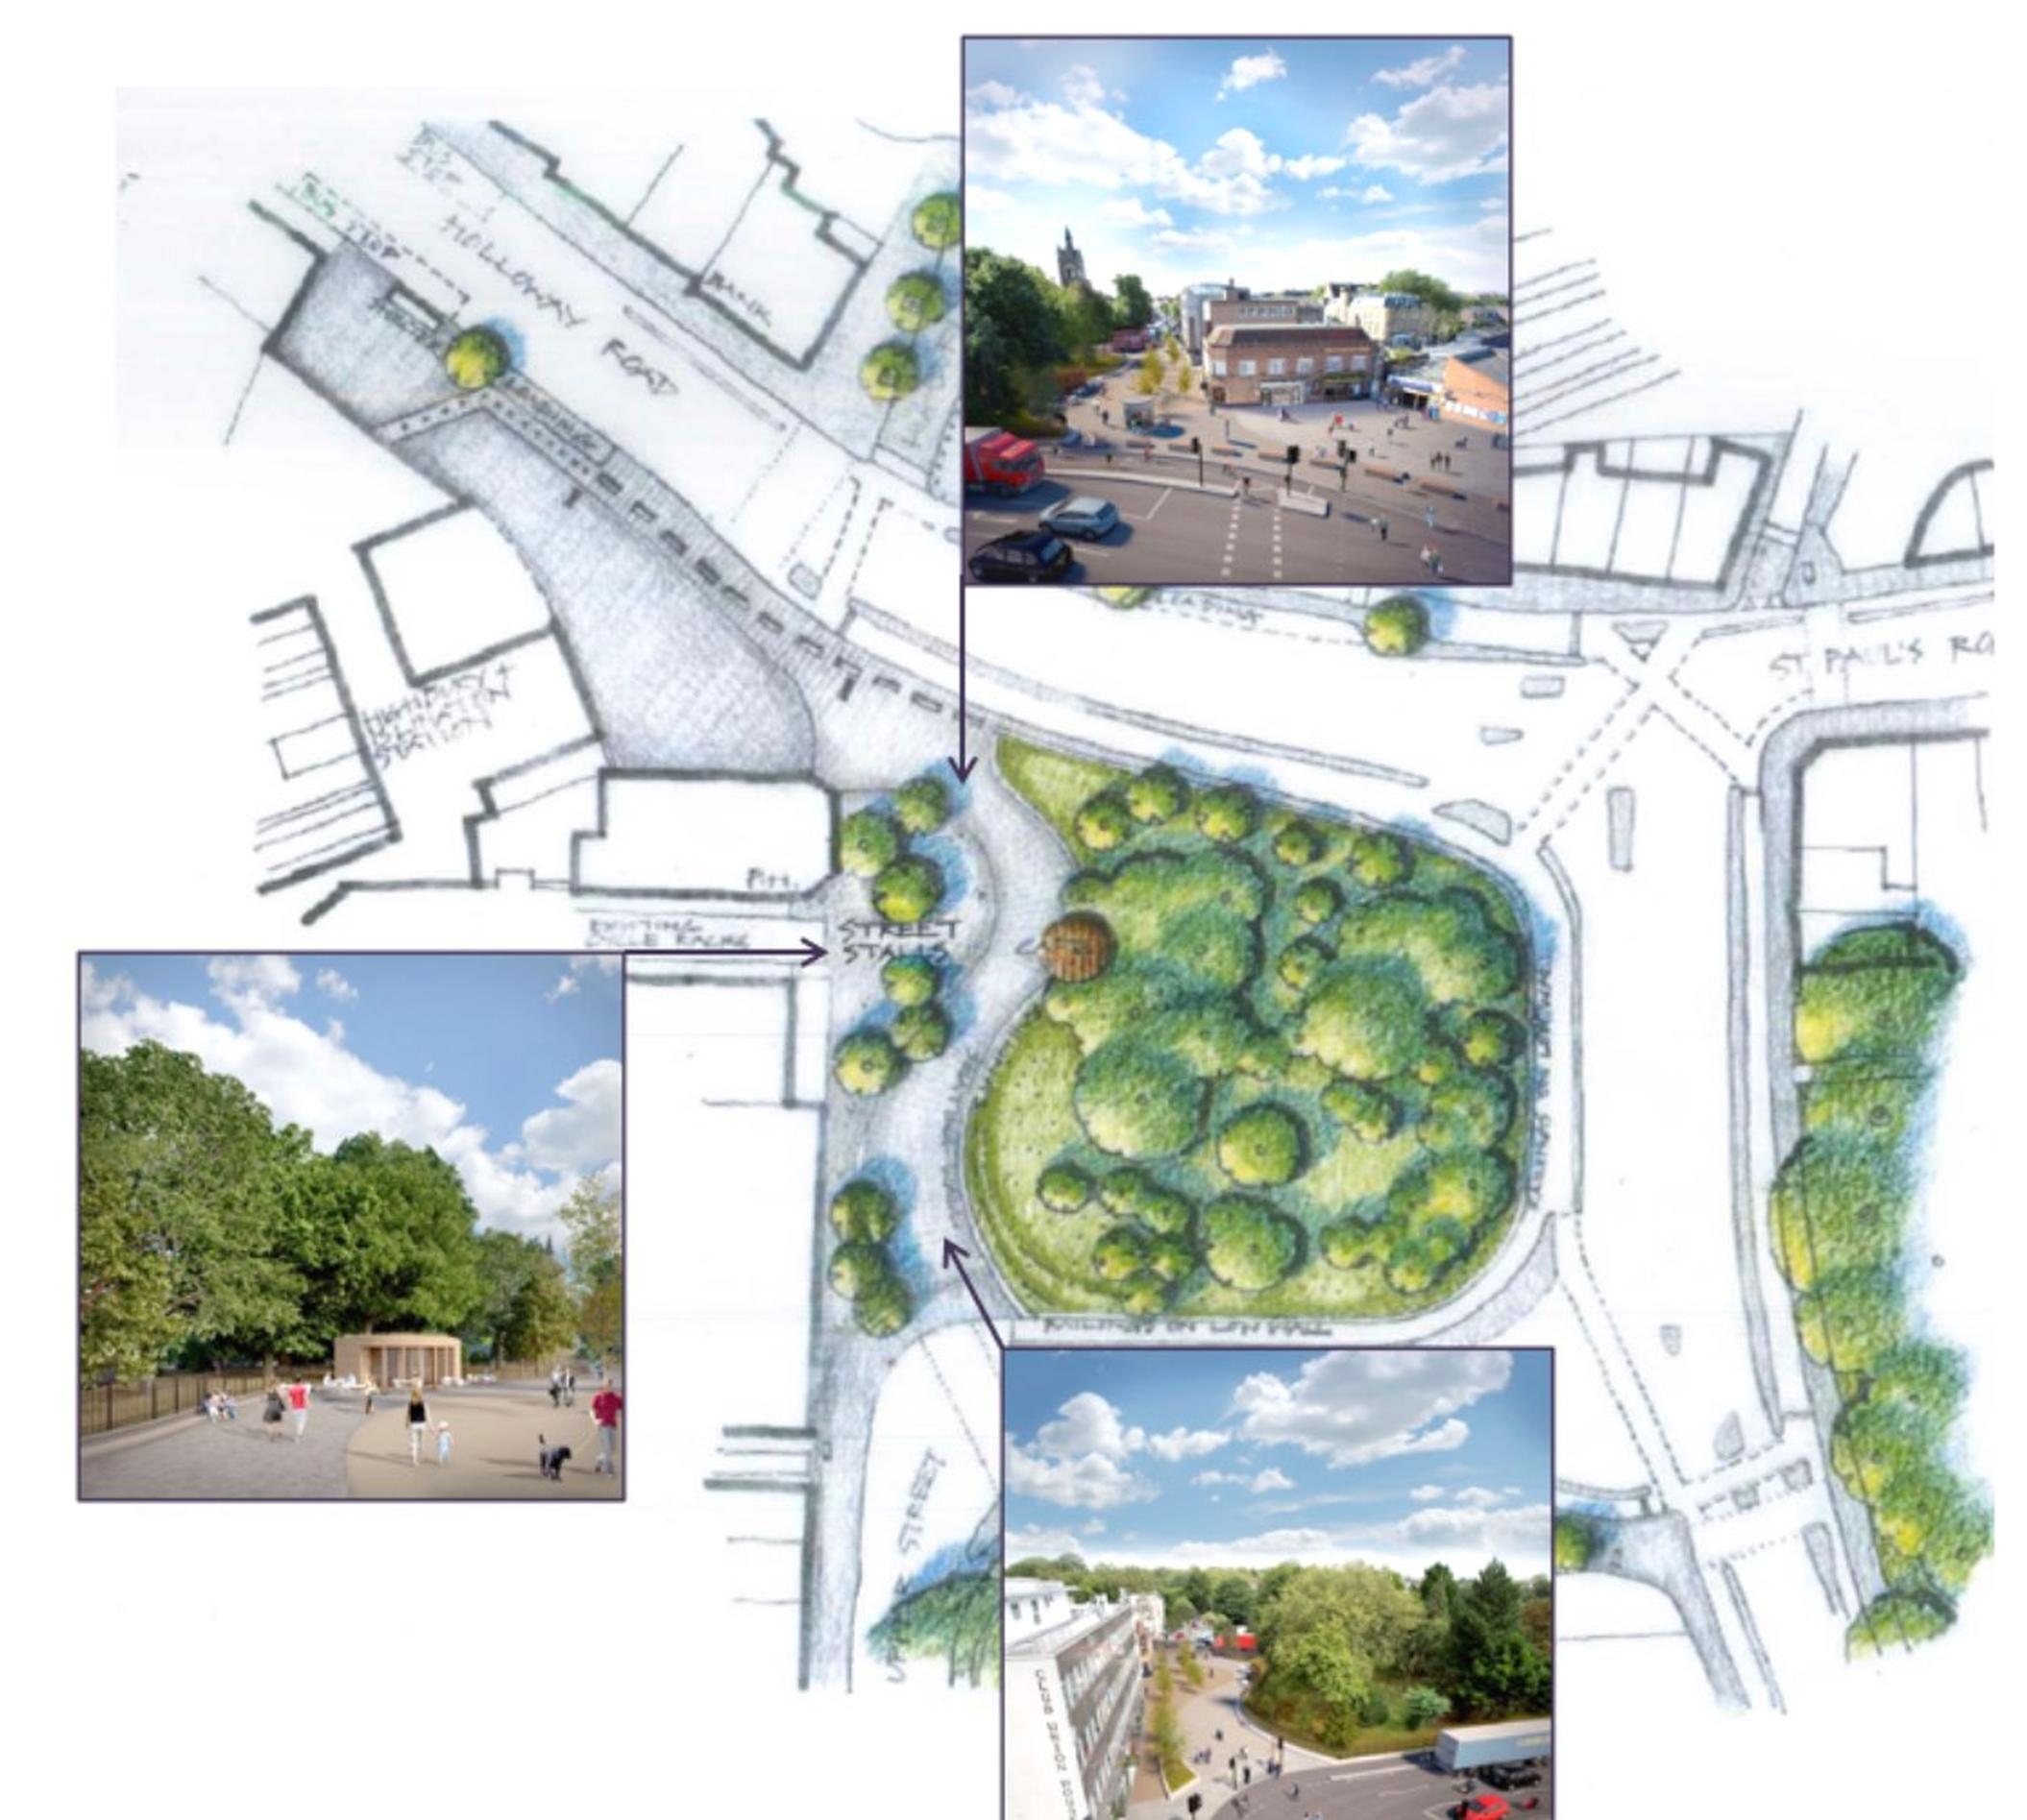 Plans at Highbury Corner include new segregated cycle lanes and cycle-specific signals and improved pedestrian facilities